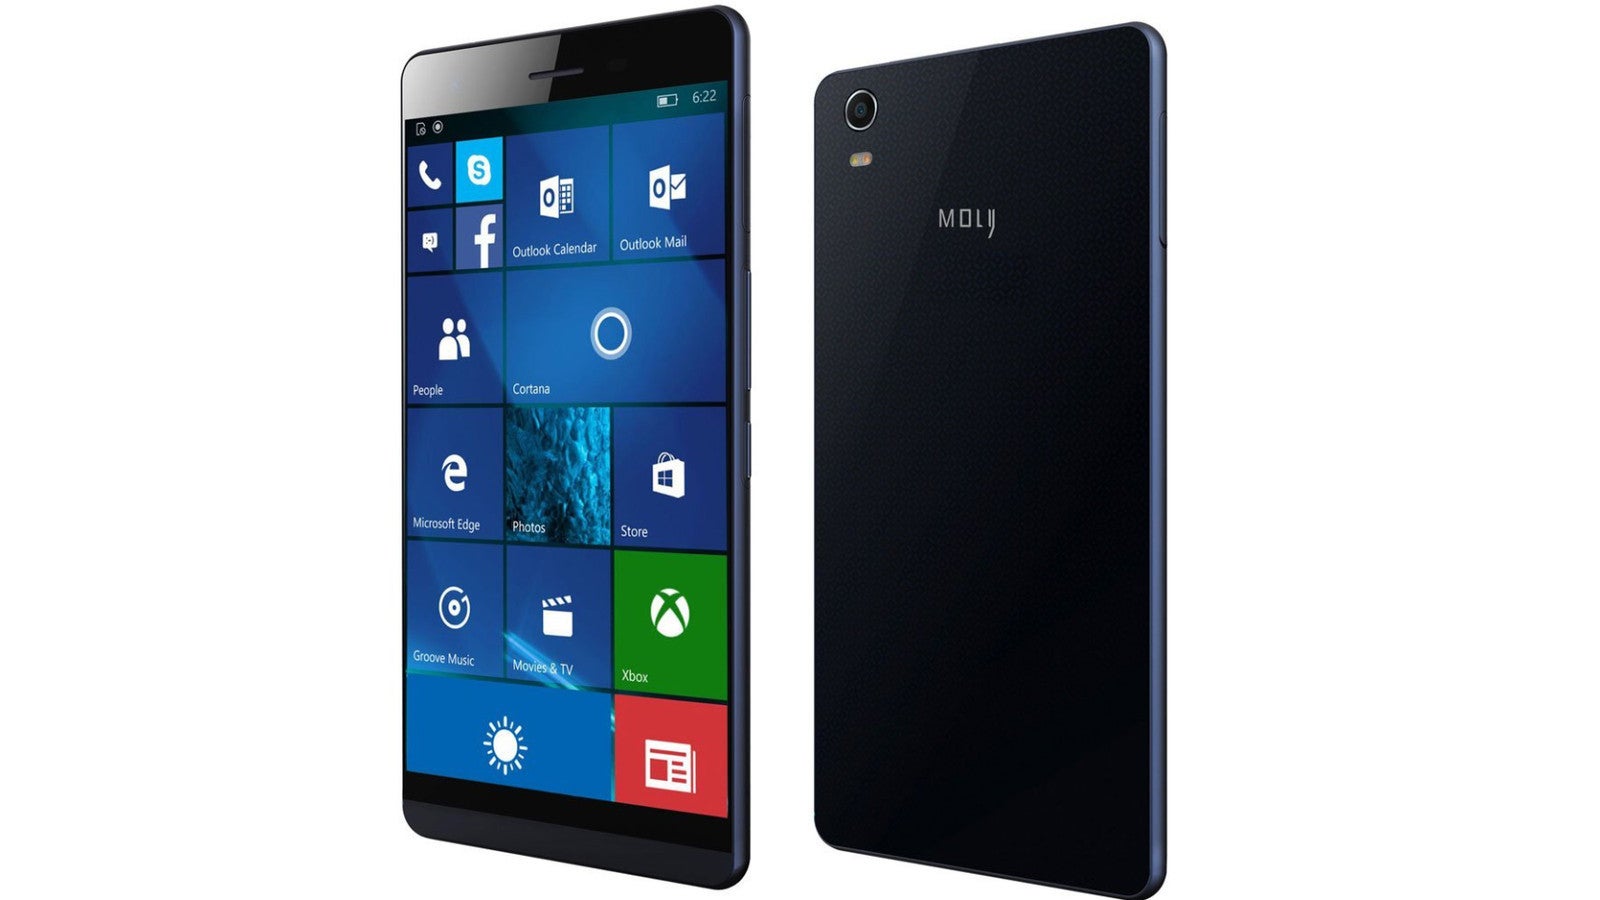 Coship Moly X1 Windows Phone crowdfunding campaign ends with just 11 phones sold